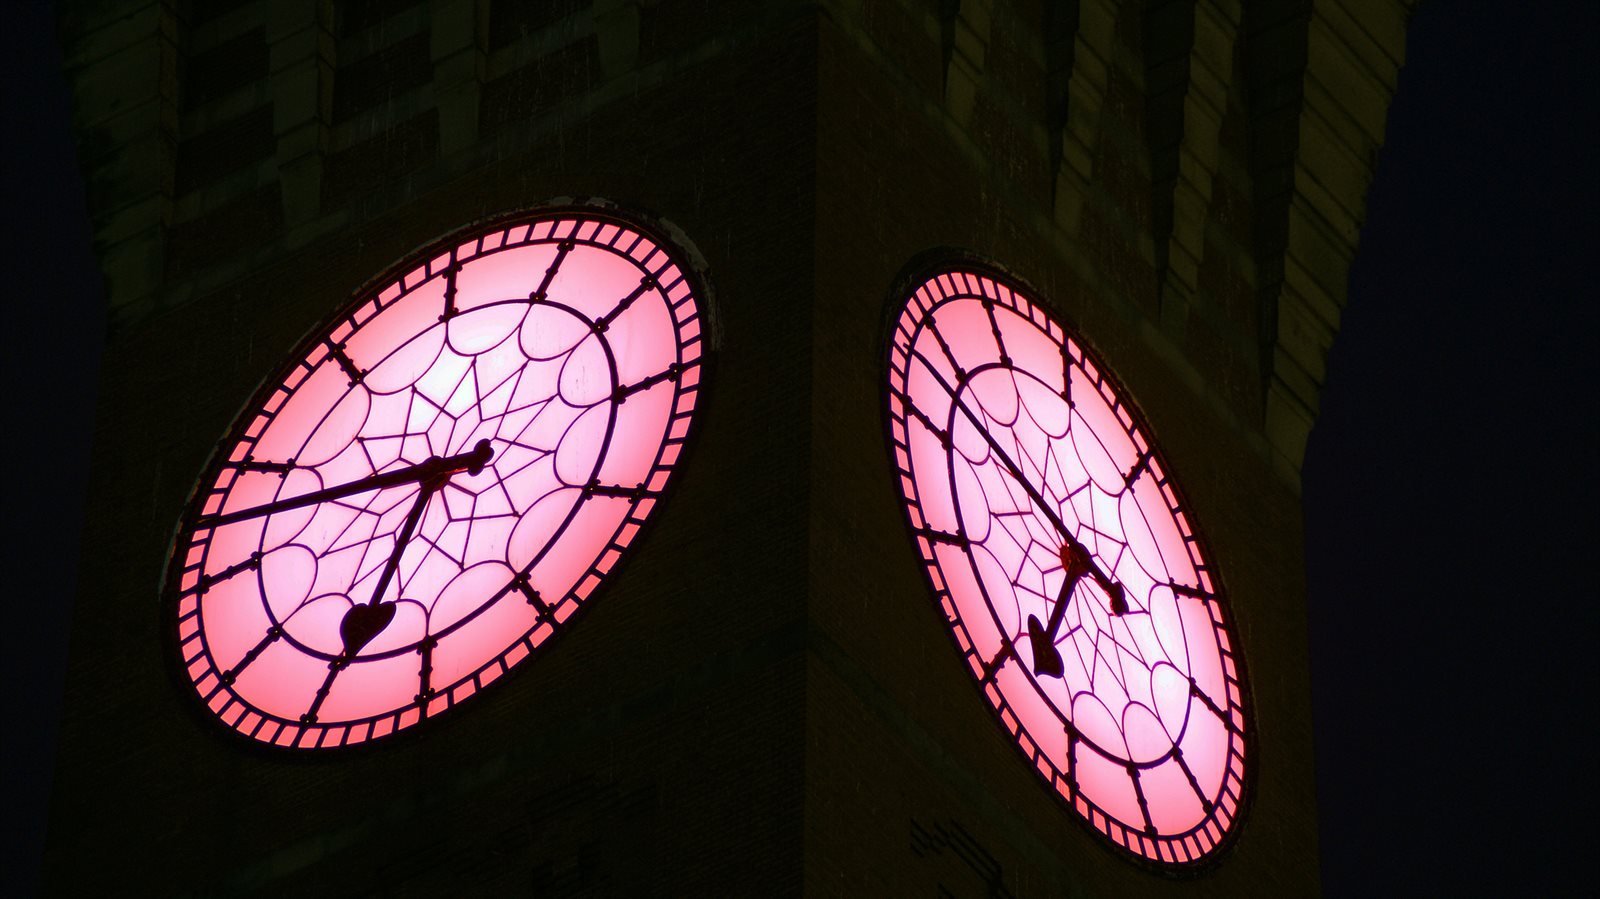 A close-up of Old Joe's clockface which is lit up pink